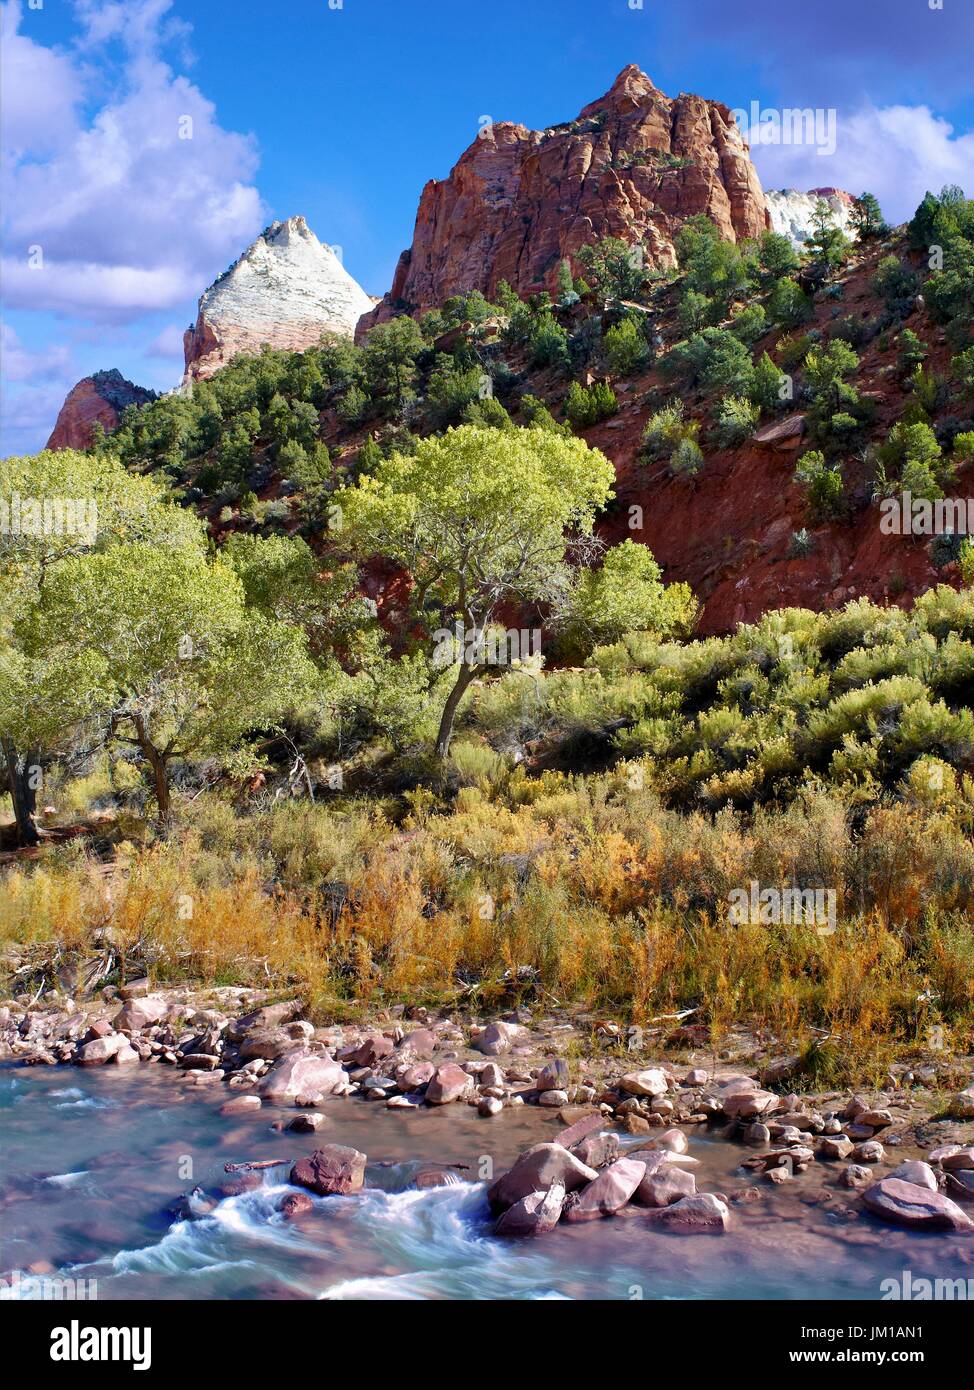 A view of the mountainous landscape of Zion National Park, Utah, USA during the fall season Stock Photo